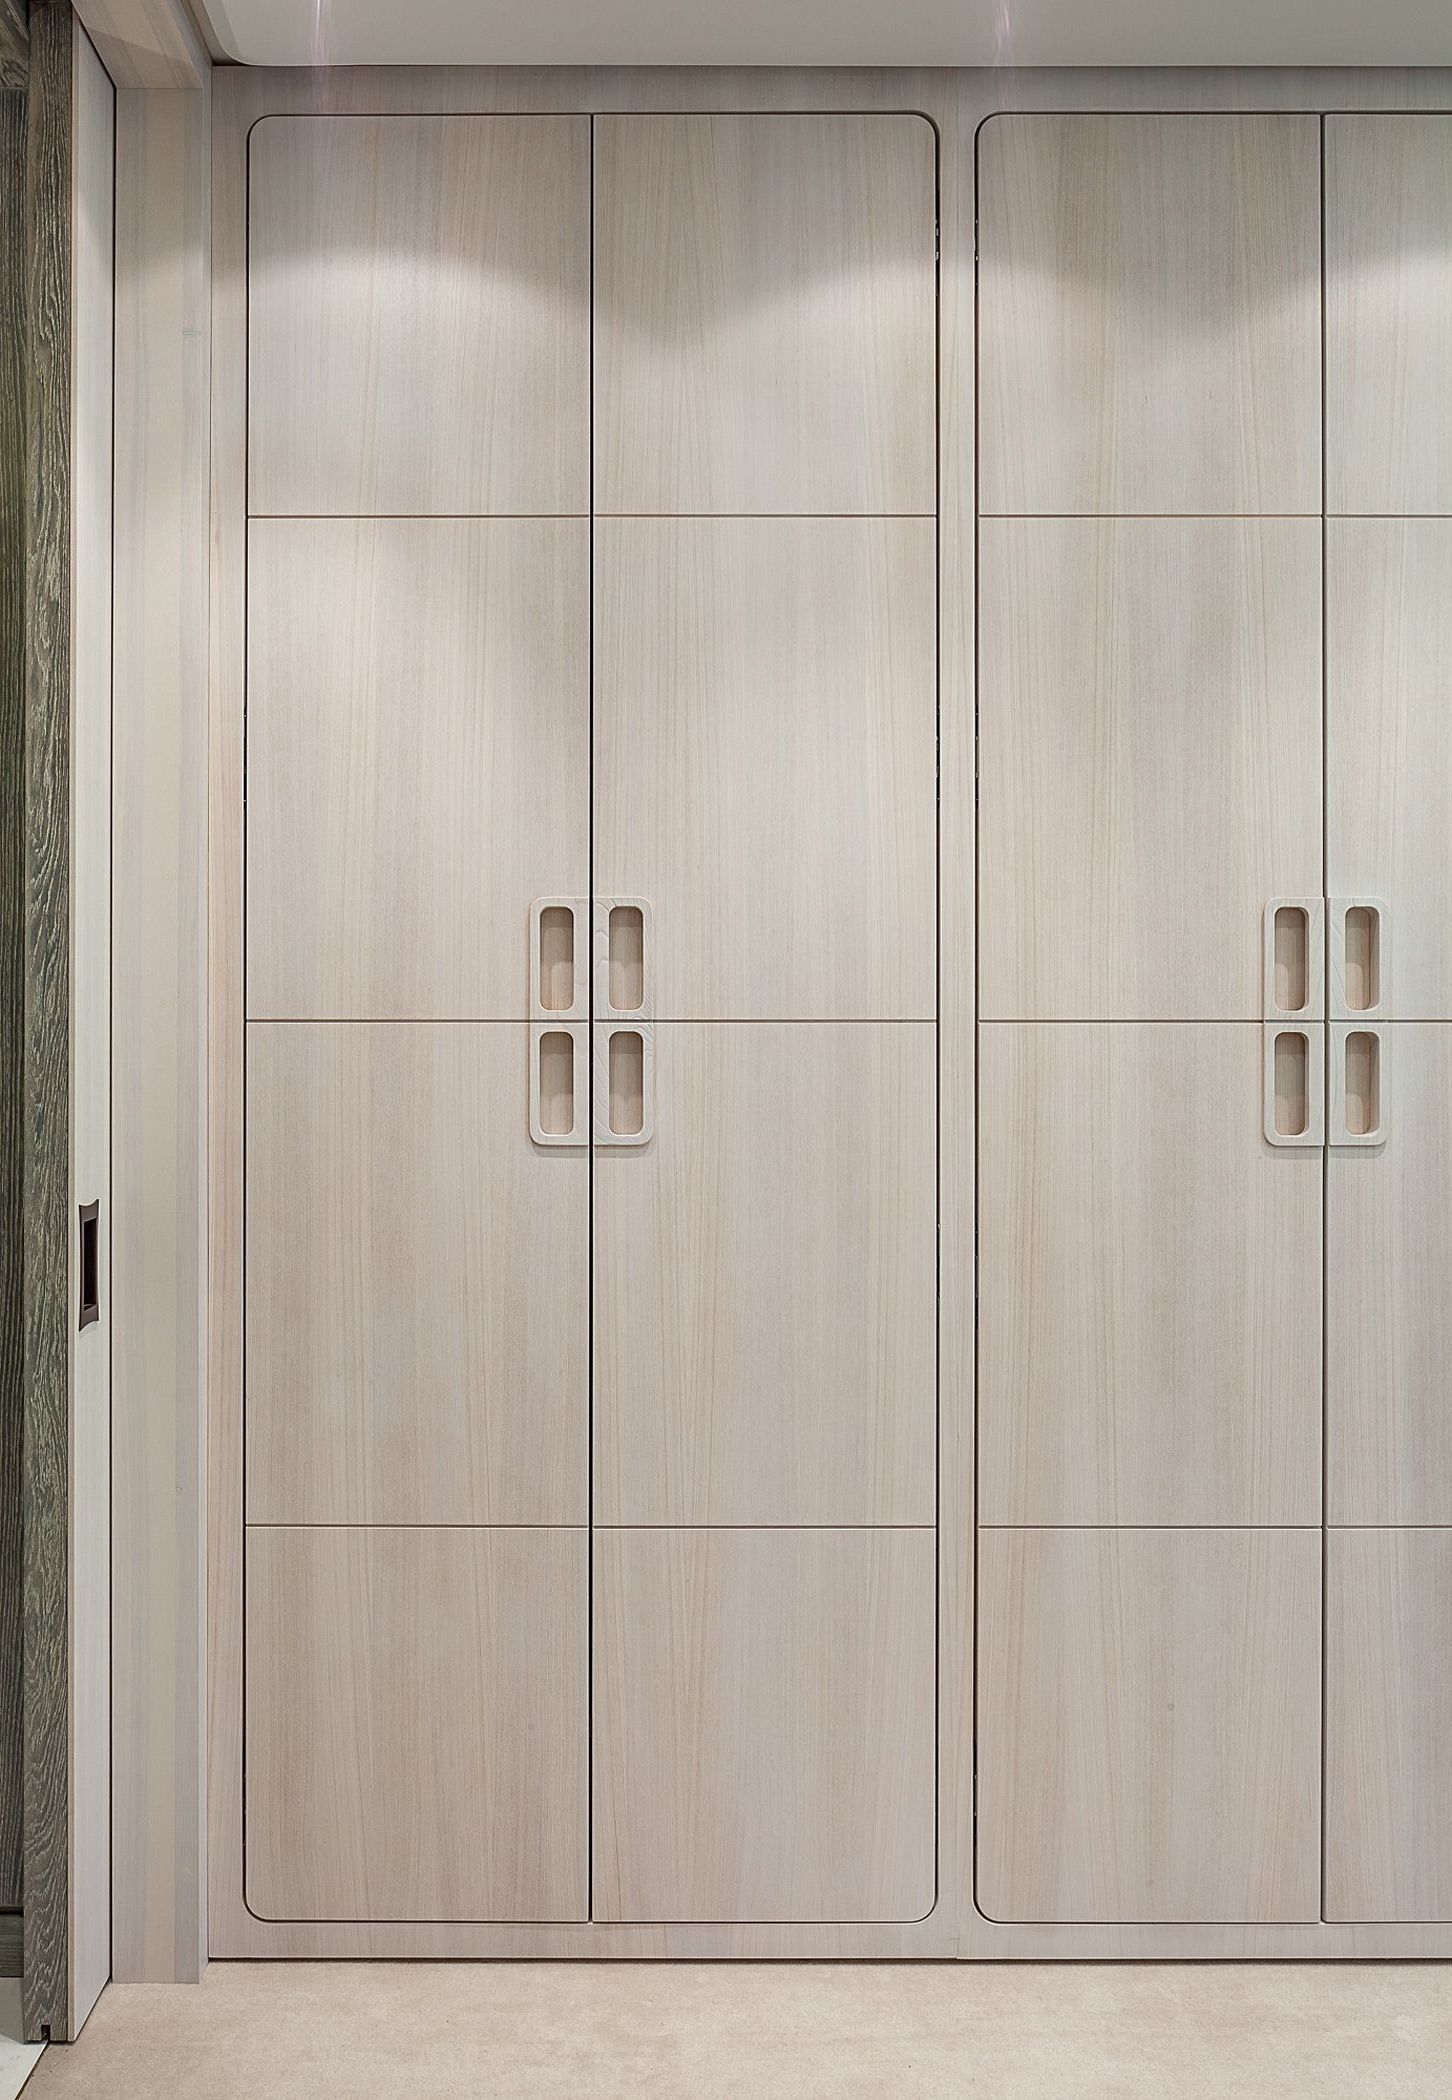 Architectural Bureau Catherine Fedorchenko With Regard To Newest Curved Wardrobe Doors (View 14 of 15)